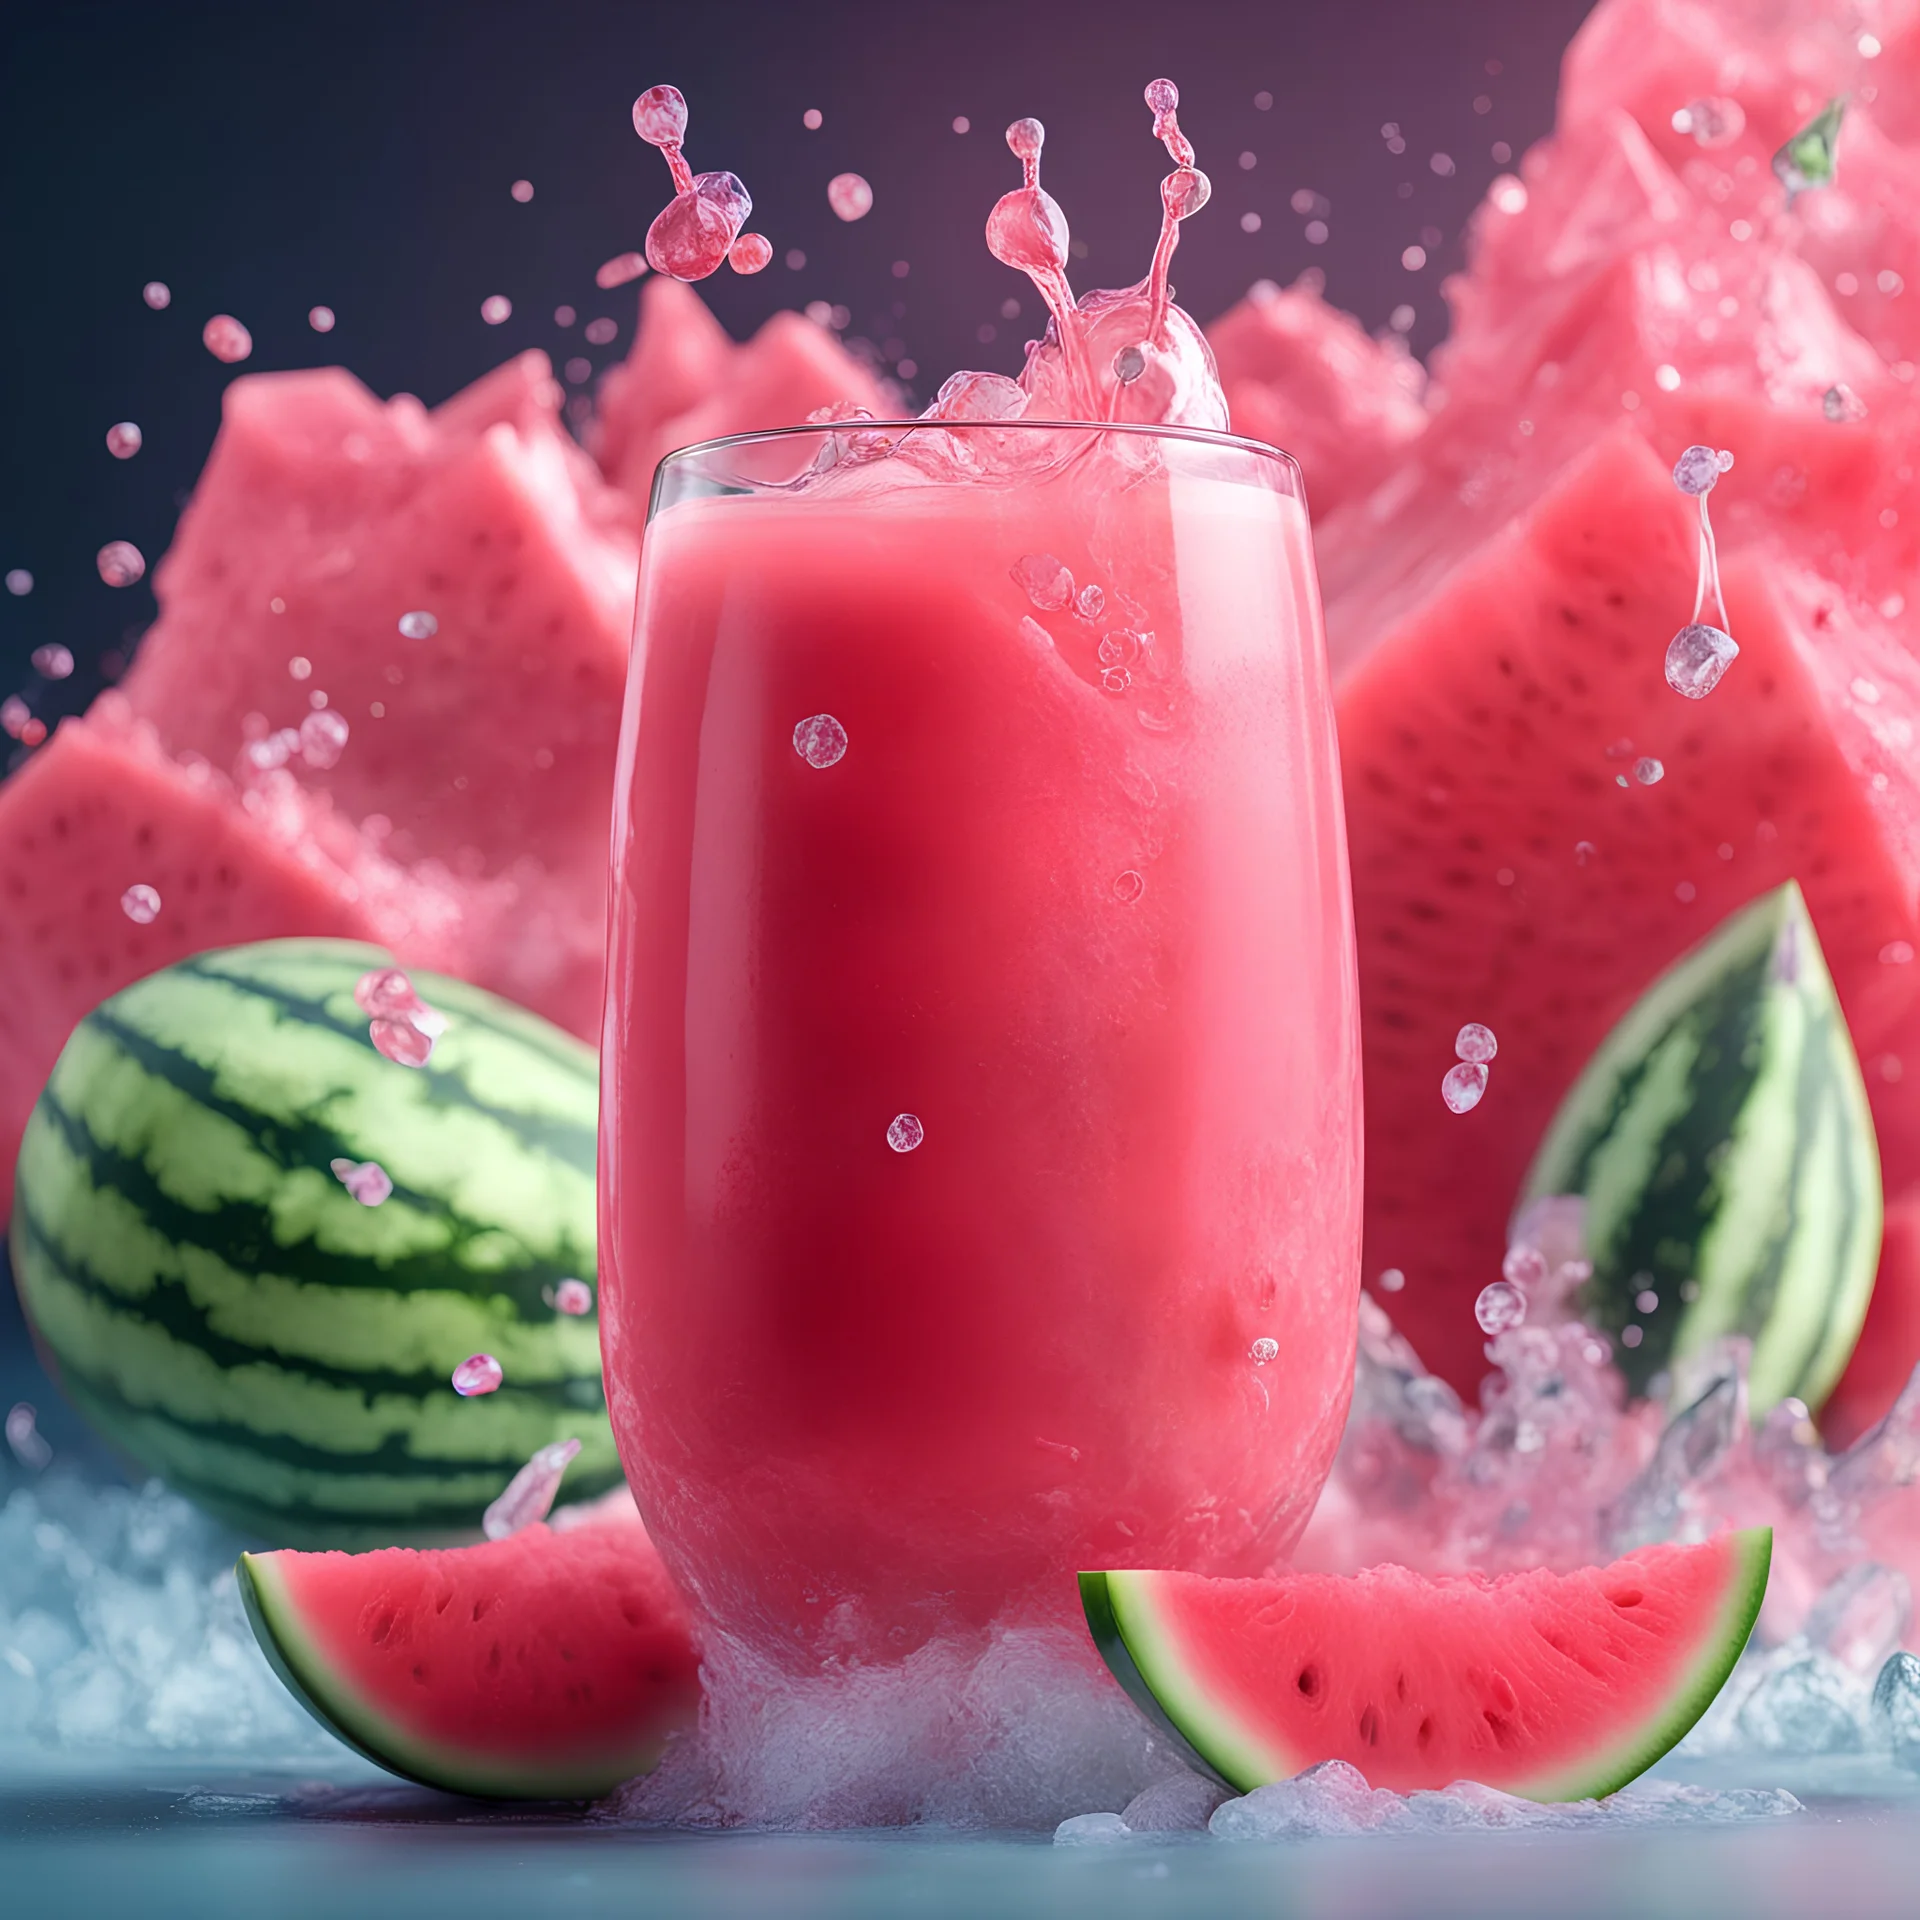 Icy watermelon juice With 3D technology and 8K resolution In attractive colors